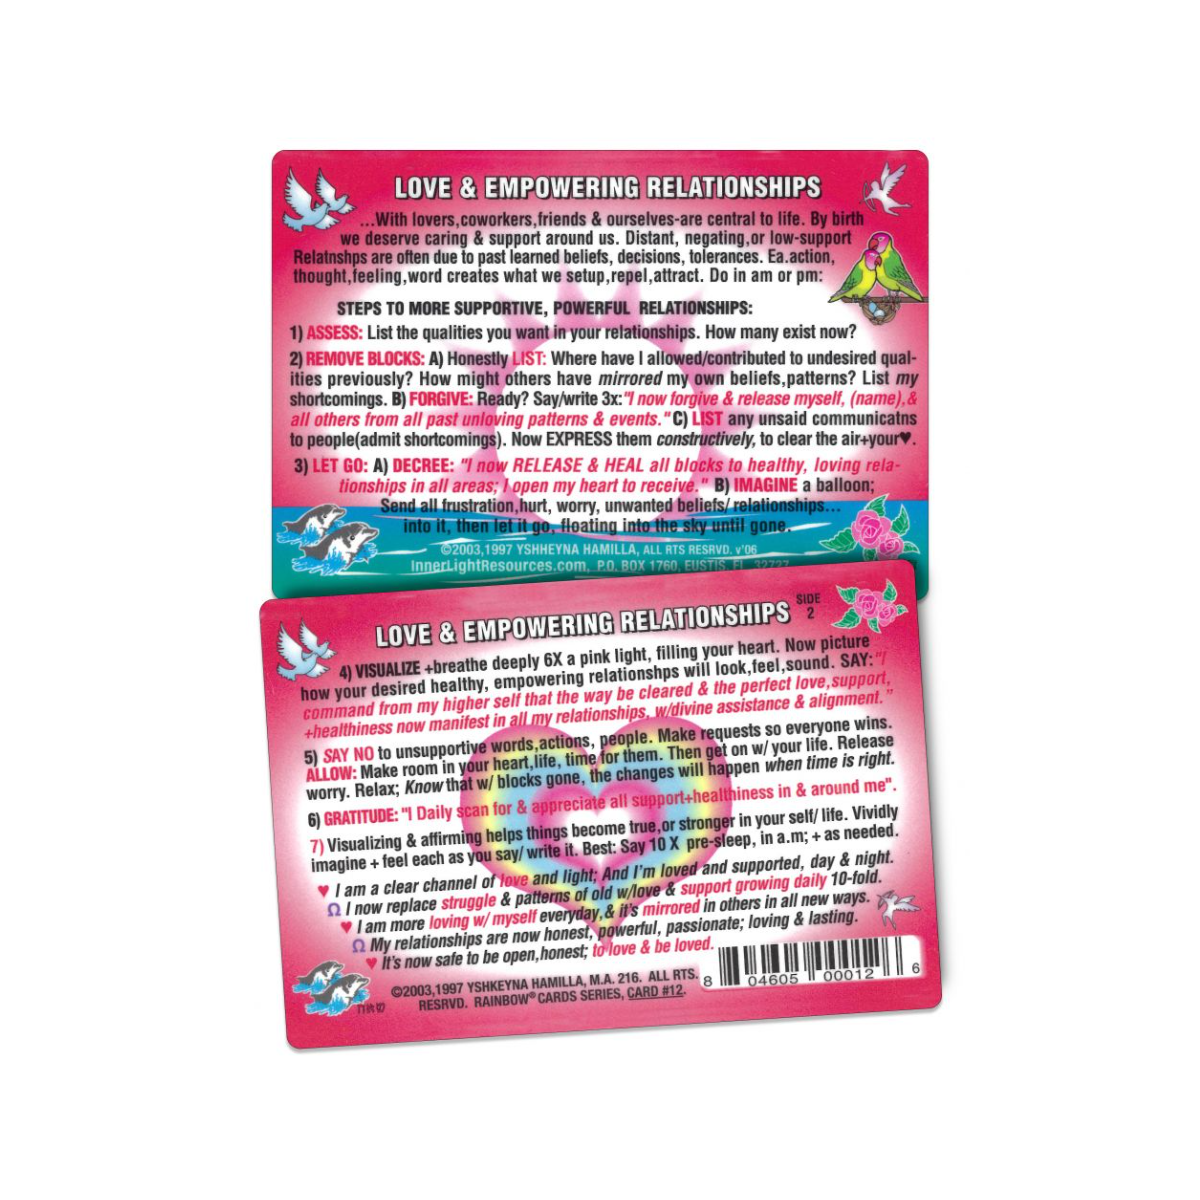 Love & Empowering Relationships Wallet Card